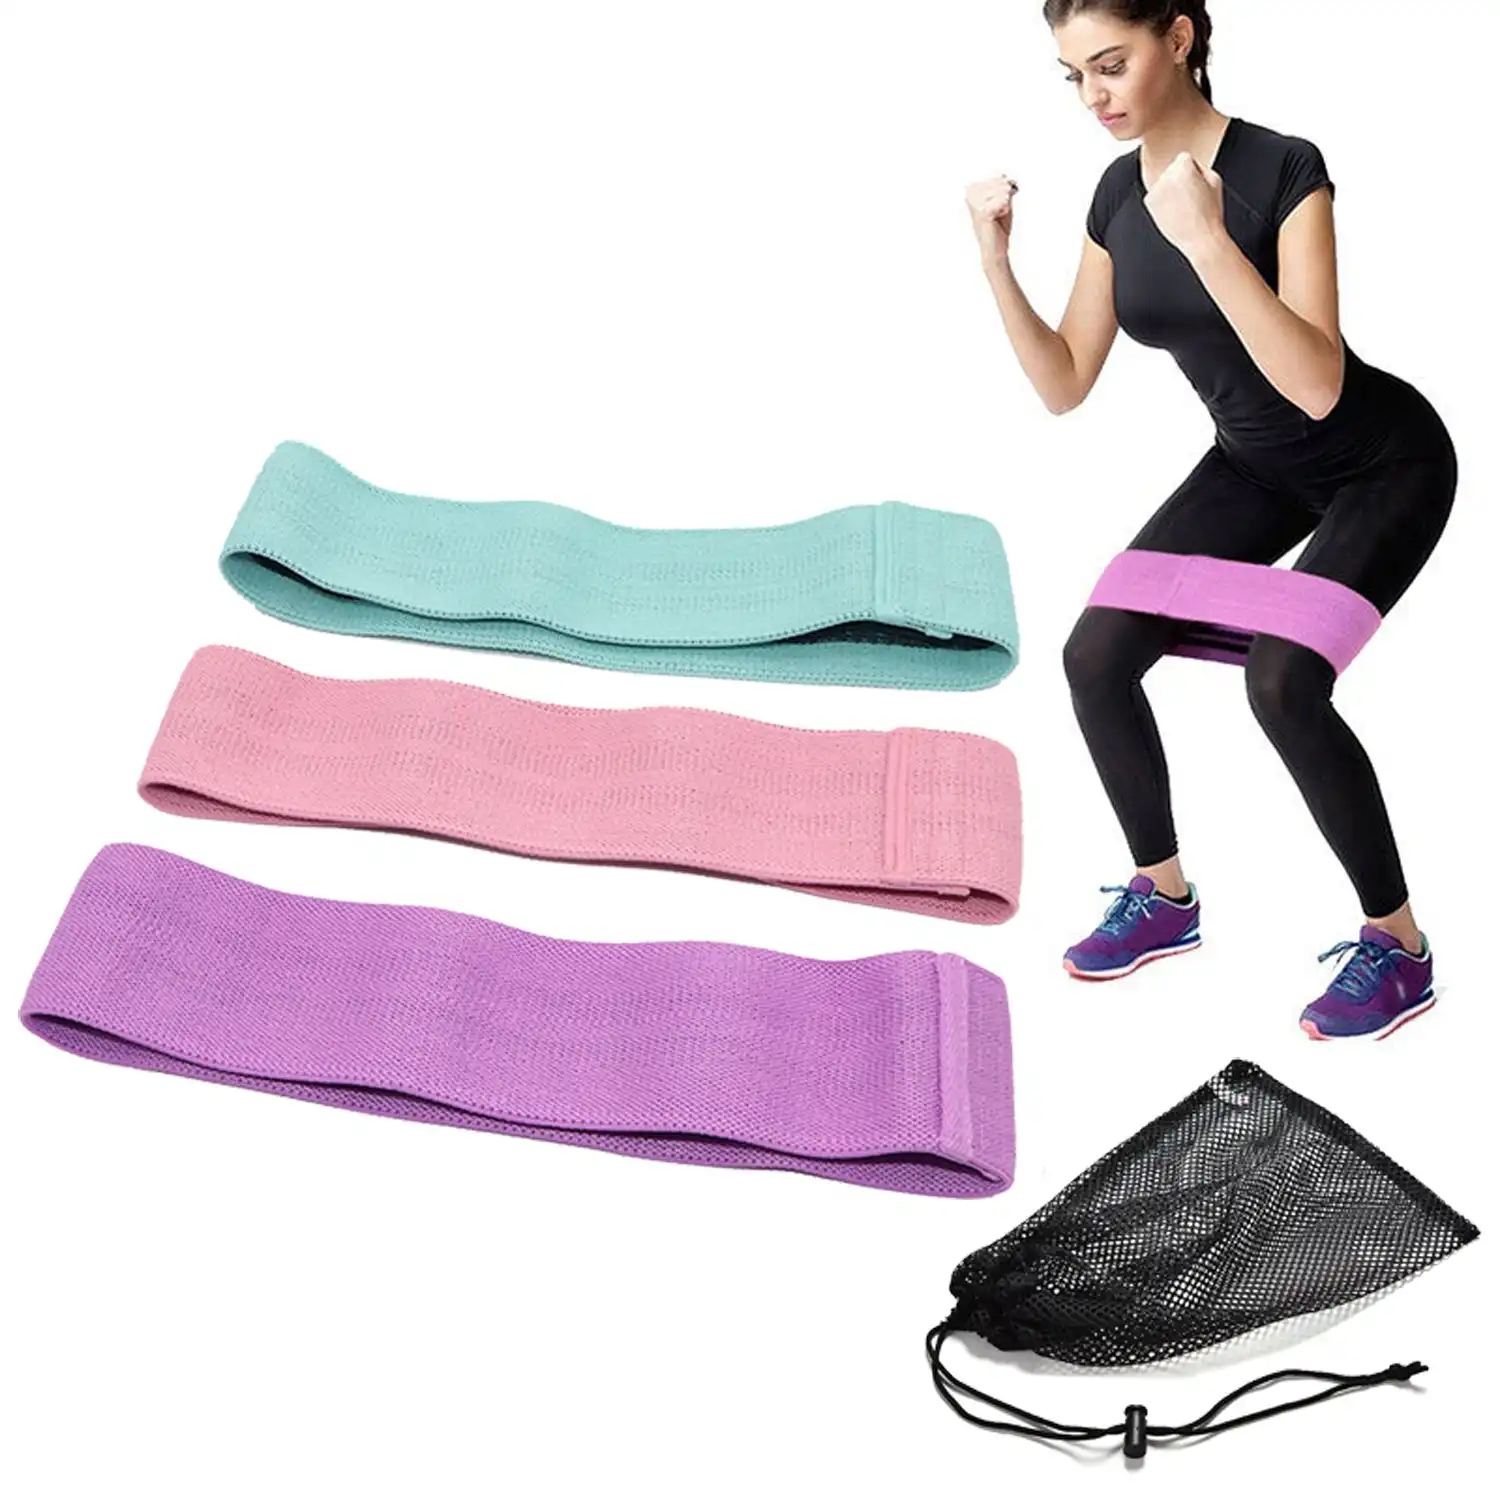 TODO 3 pcs Hip Loop Exercise Resistance Band Booty Legs Trainer 3 Resistance Levels